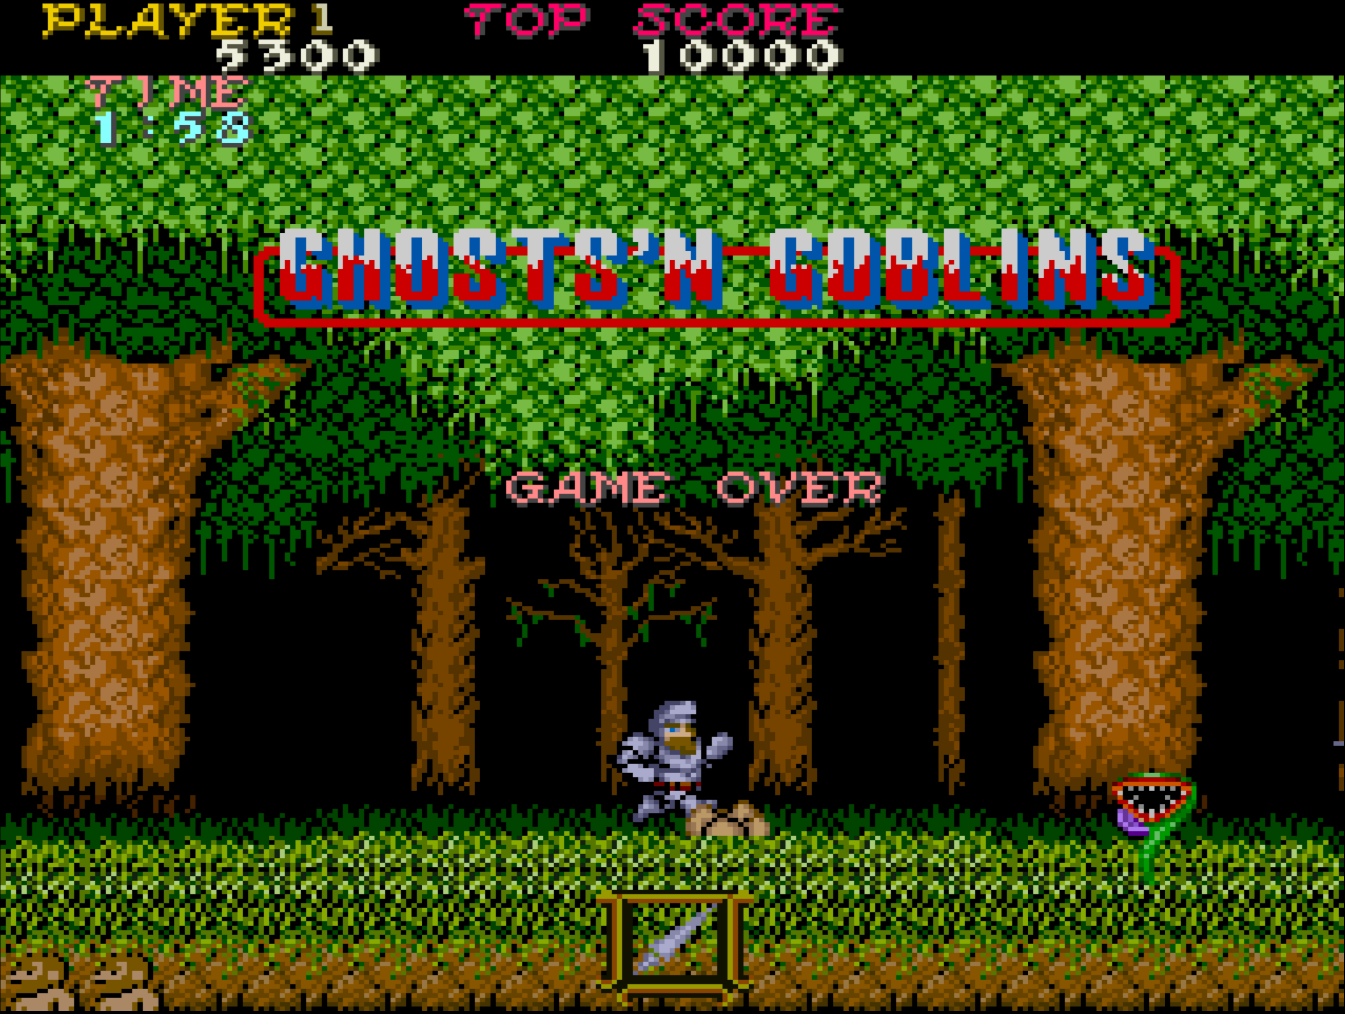 MiSTer Ghosts ‘n Goblins Core Released: Things just got serious.